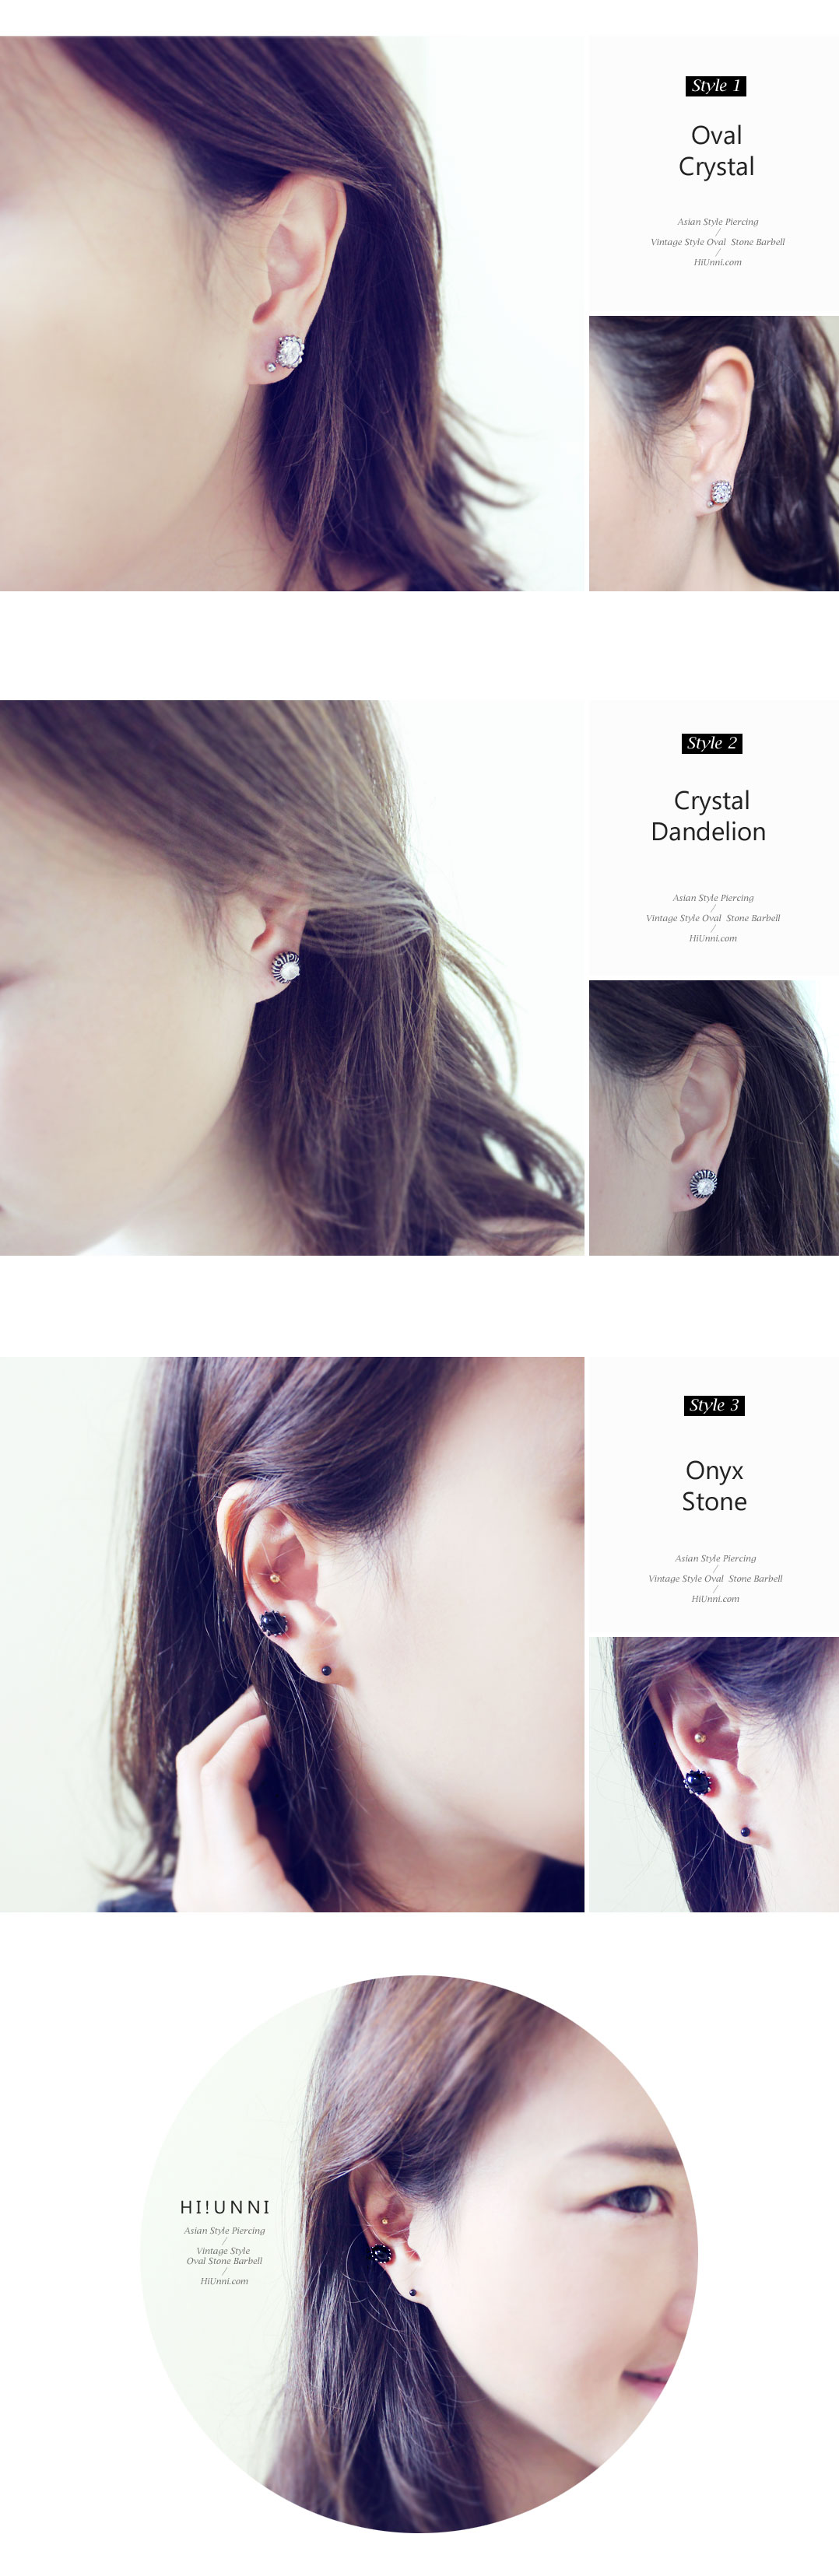 ear_studs_piercing_Cartilage_16g_316l_korean_asian_style_barbell_Vintage_Oval_crystal_Cubic_4